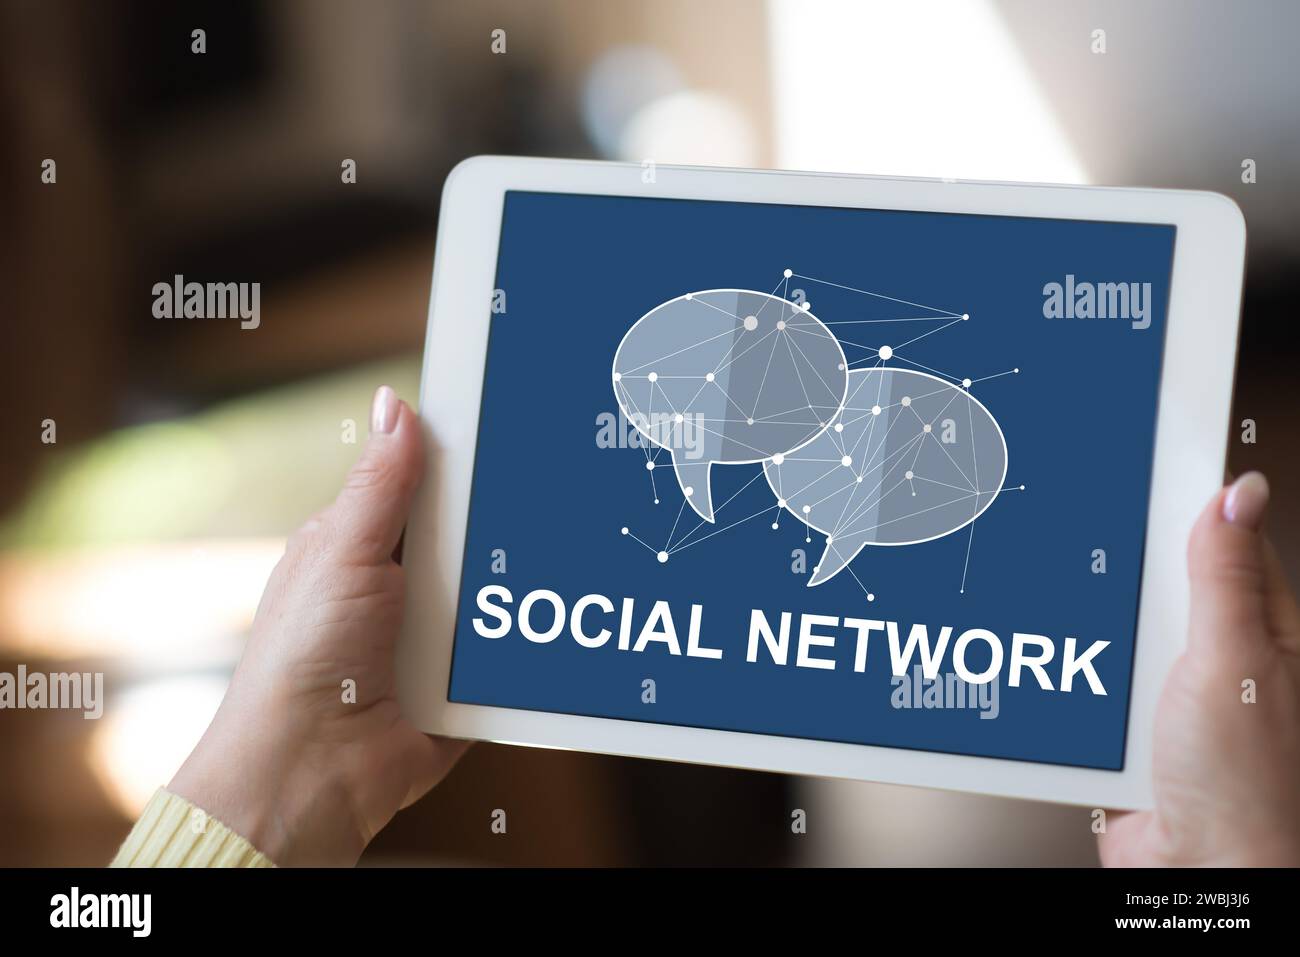 Tablet screen displaying a social network concept Stock Photo